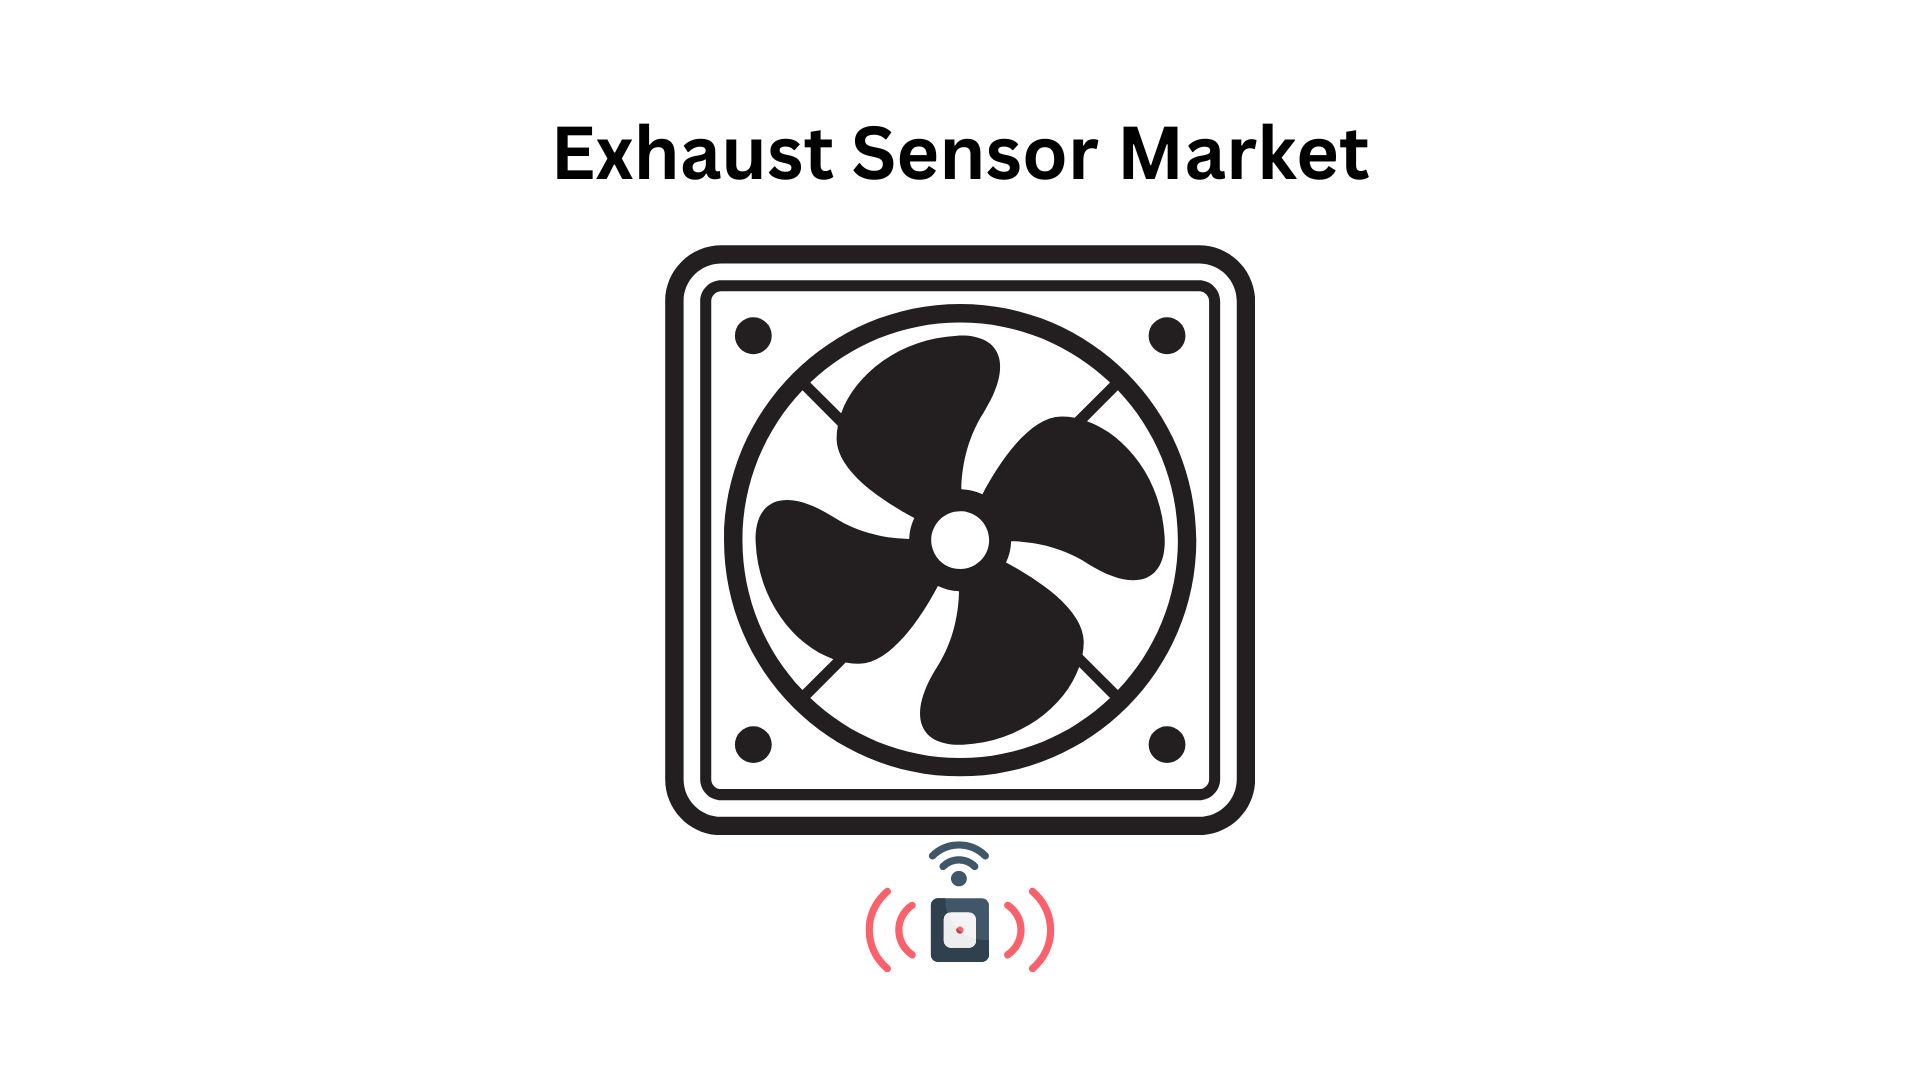 Exhaust Sensor Market size is expected to reach USD 76038.5 Mn by 2033